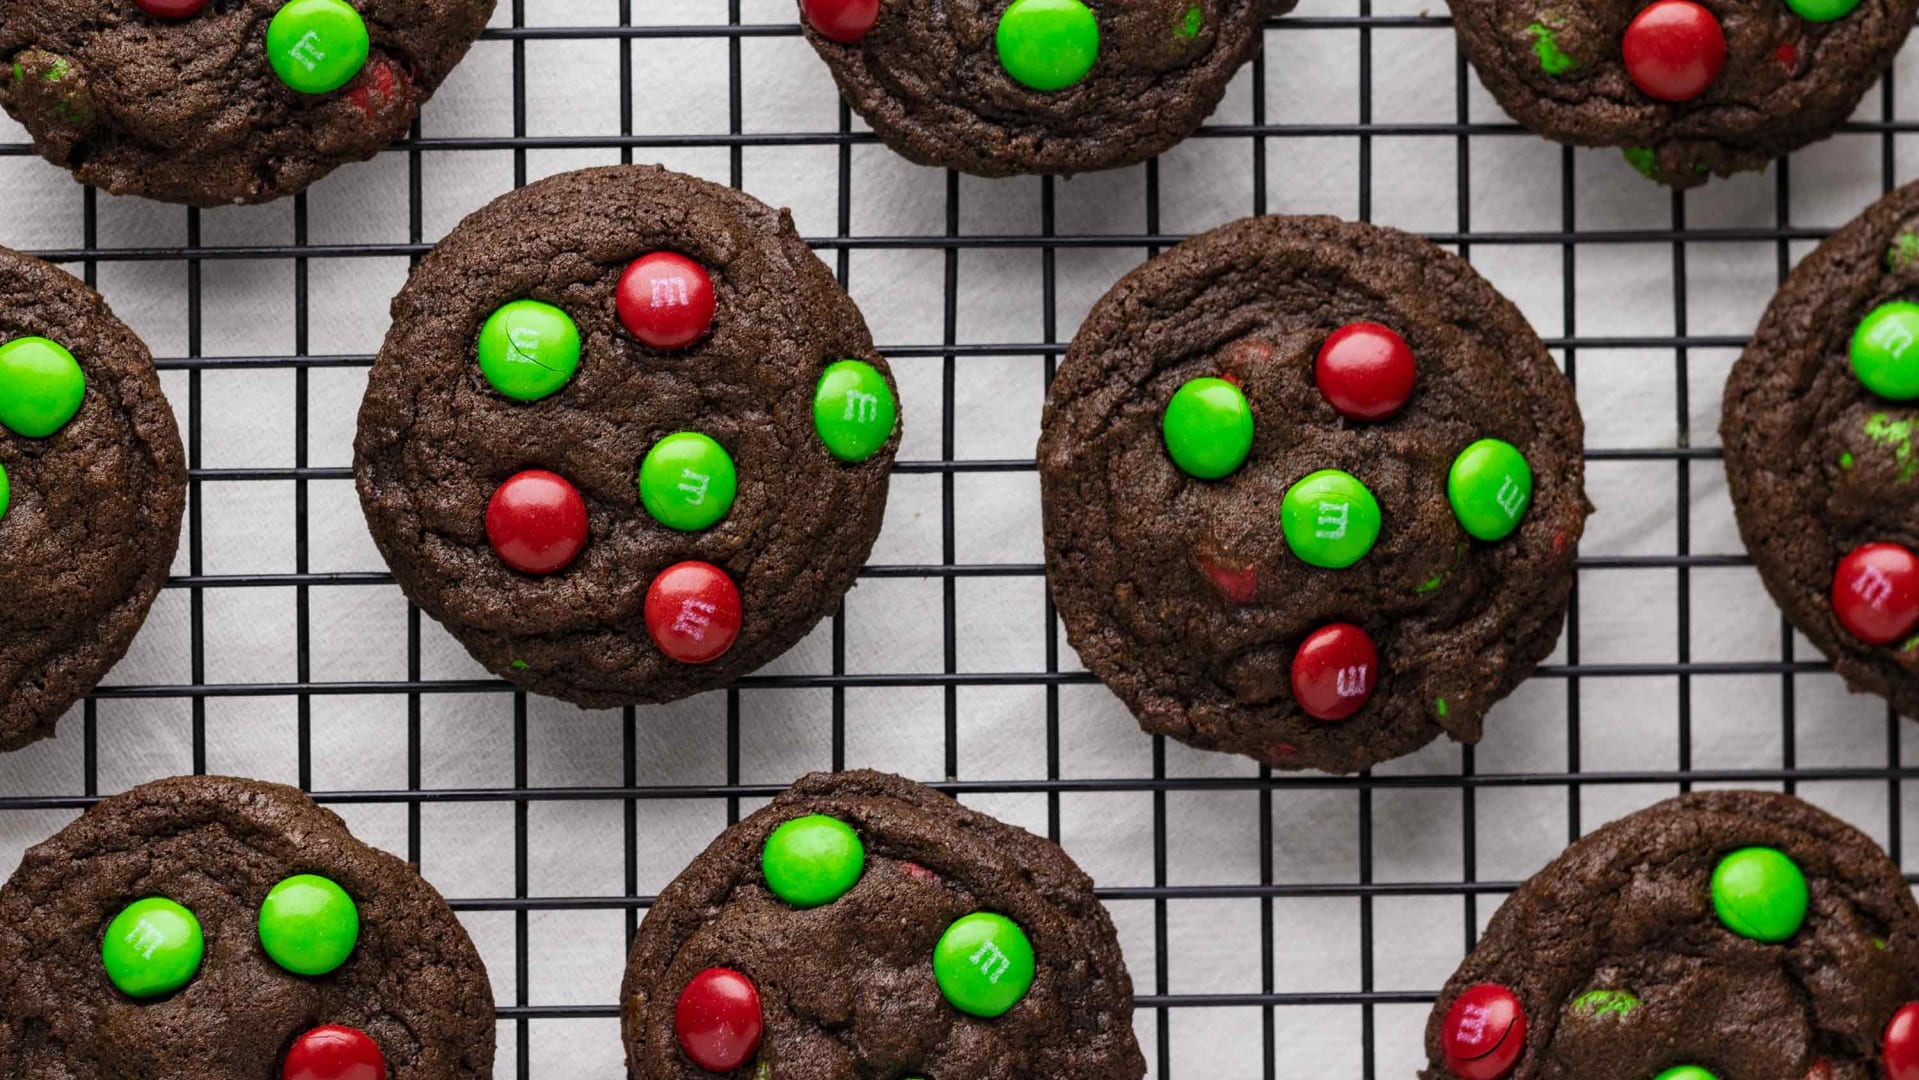 Soft Batch Chocolate M&M Cookies - Baker by Nature